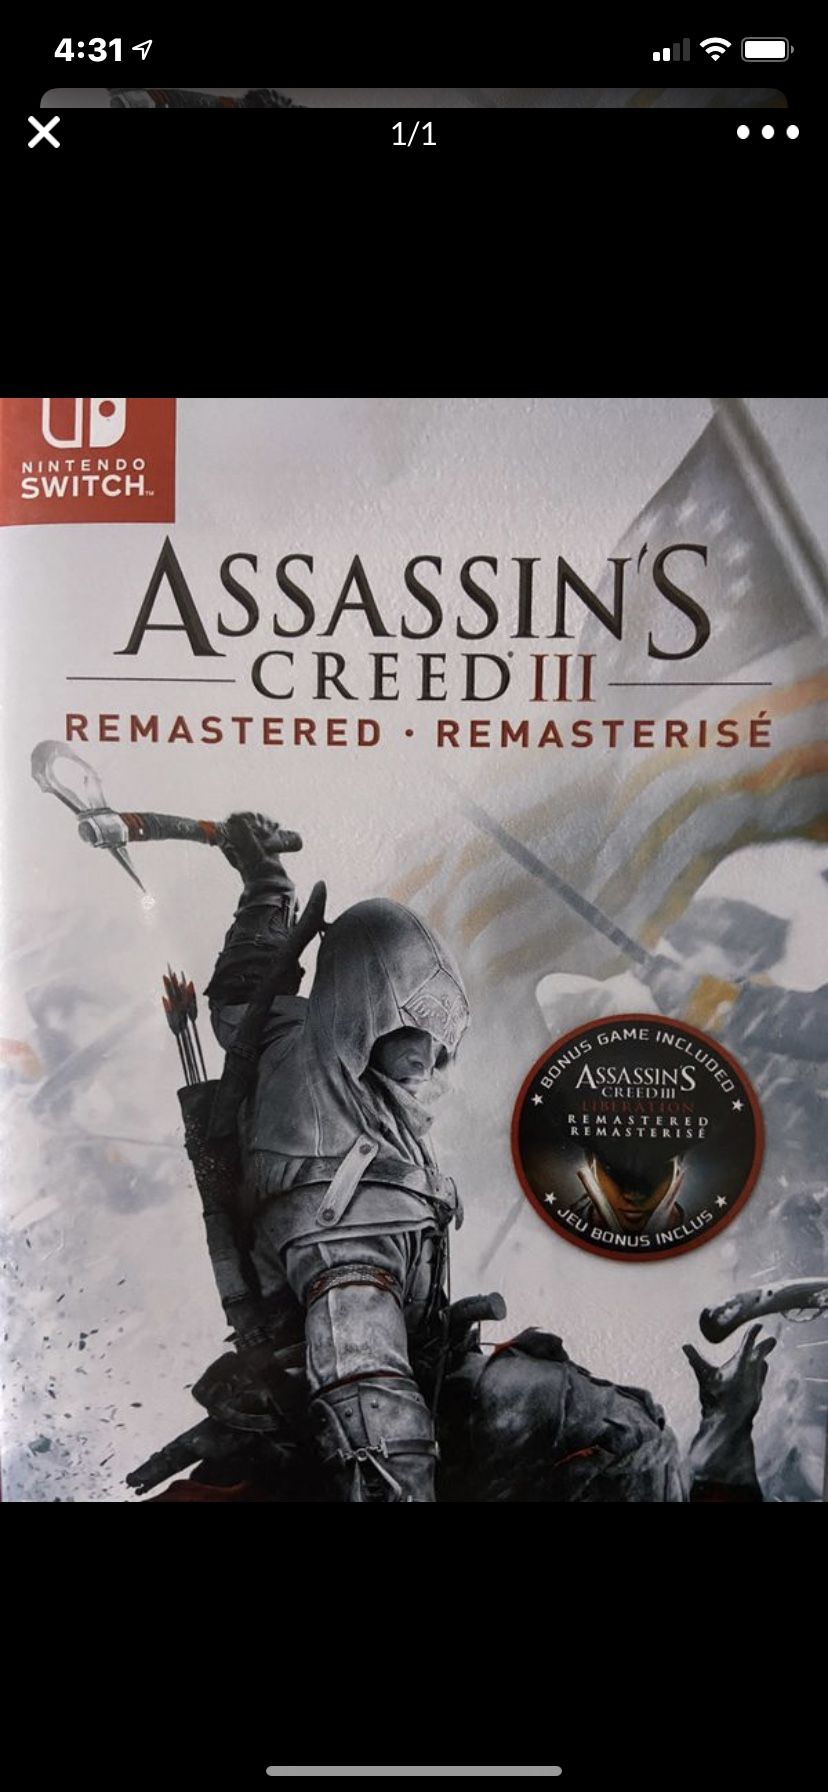 Nintendo switch assassin’s creed 3